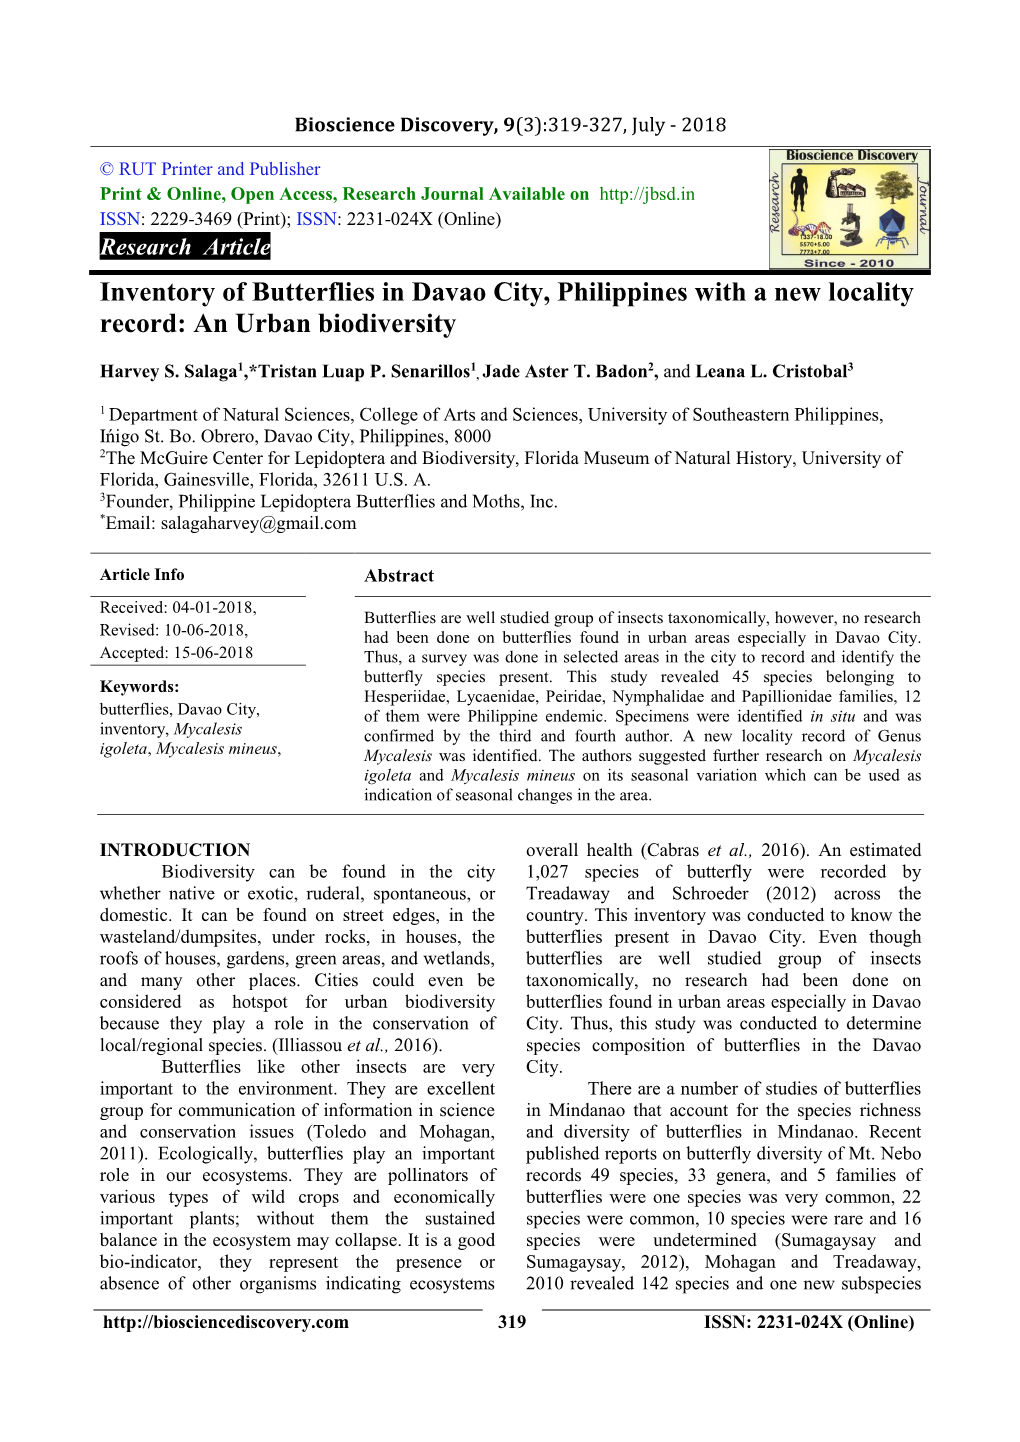 Inventory of Butterflies in Davao City, Philippines with a New Locality Record: an Urban Biodiversity